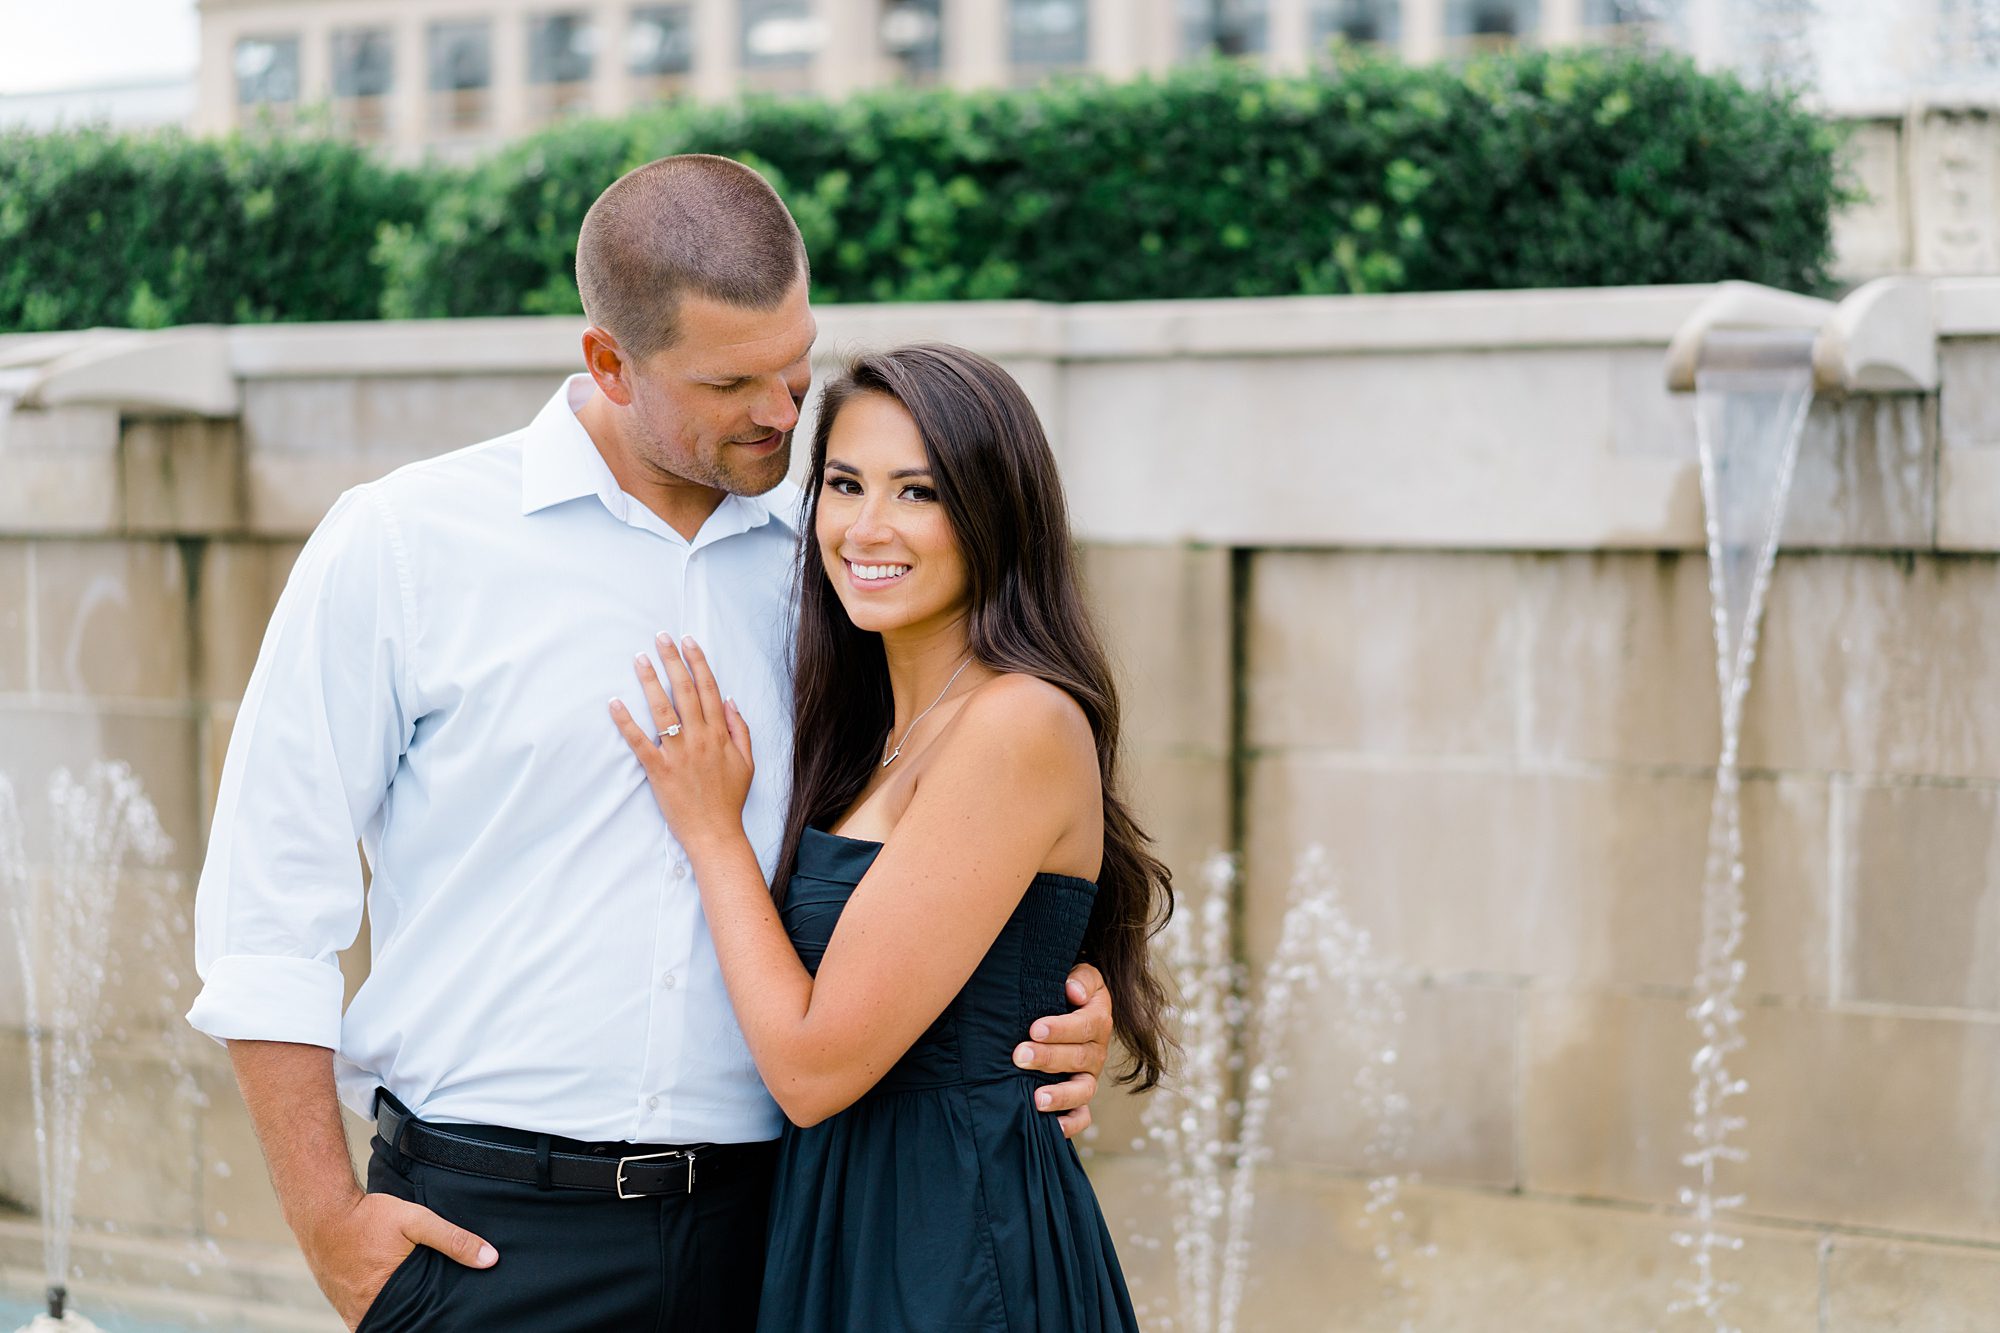 couple hug and stand near water fountain during PA engagement